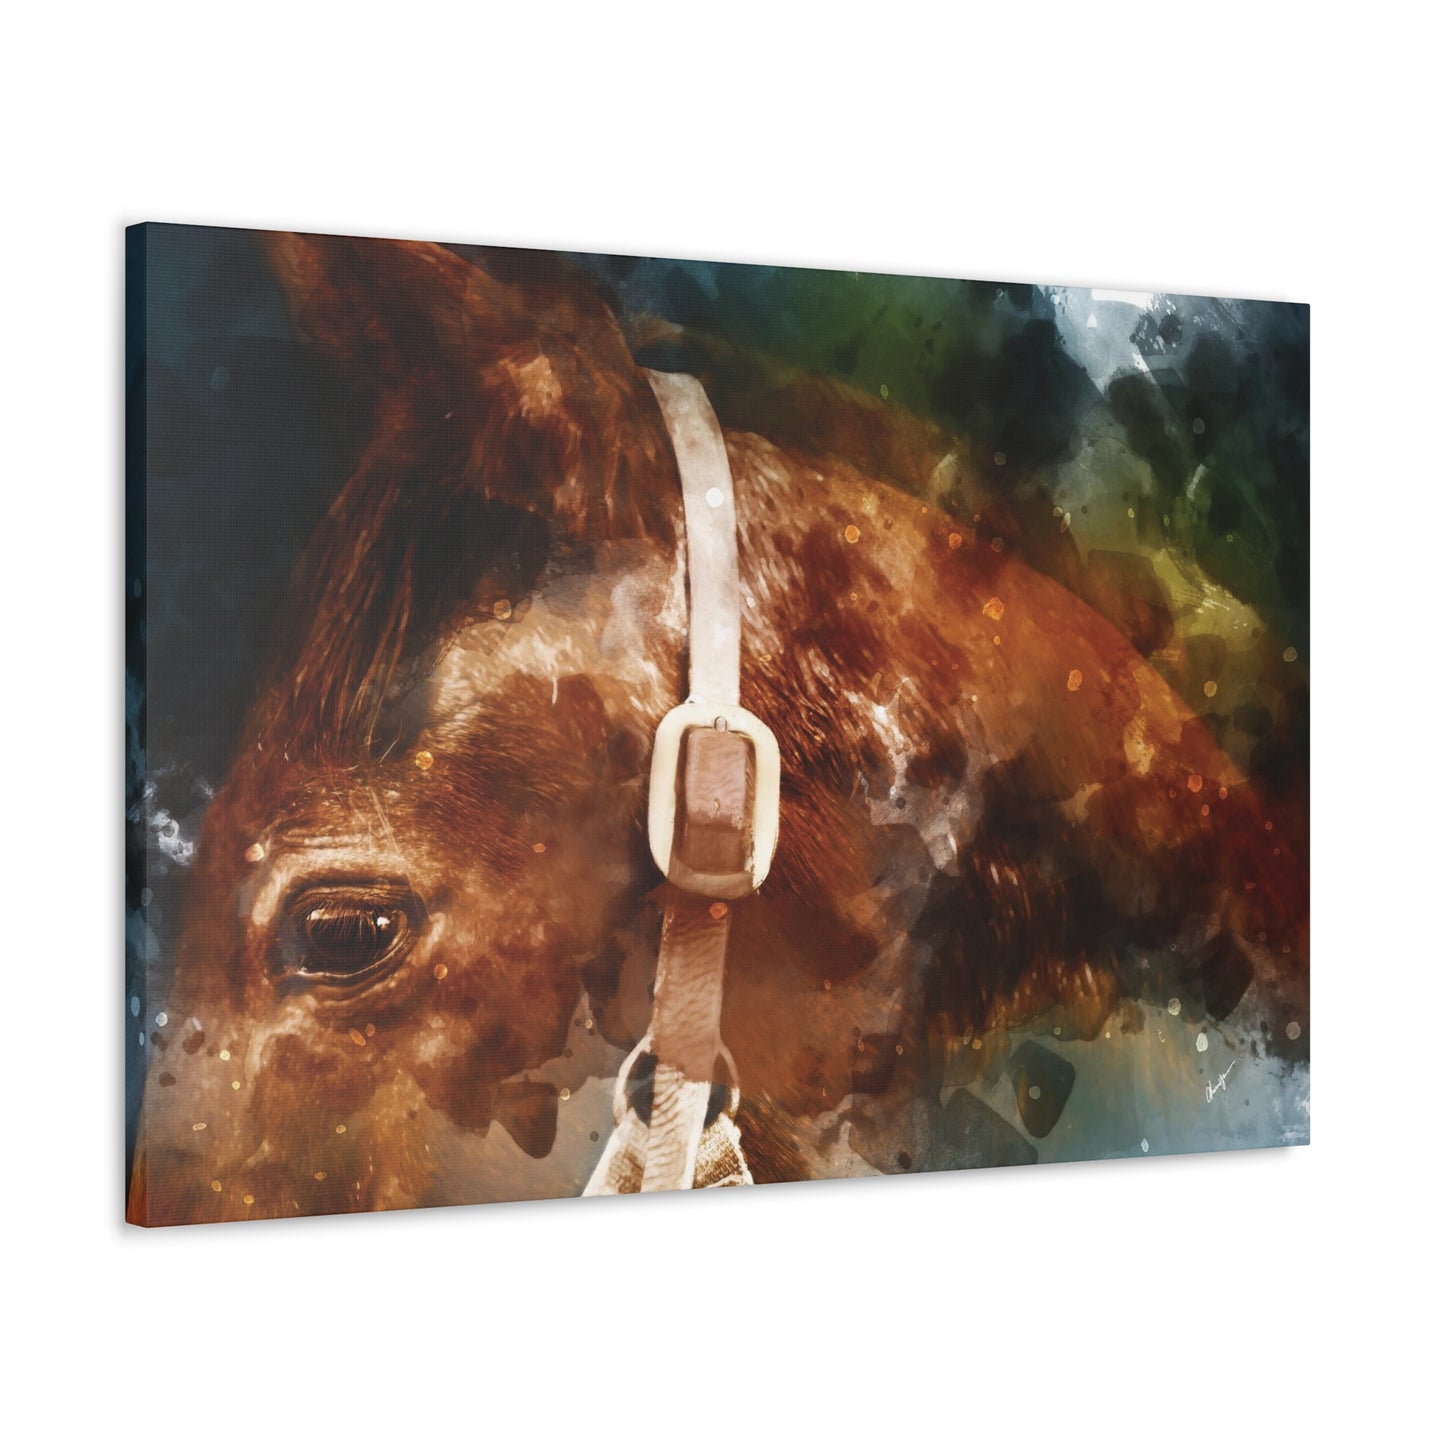 Those Eyes - Standard Unembellished Canvas Gallery Wrap